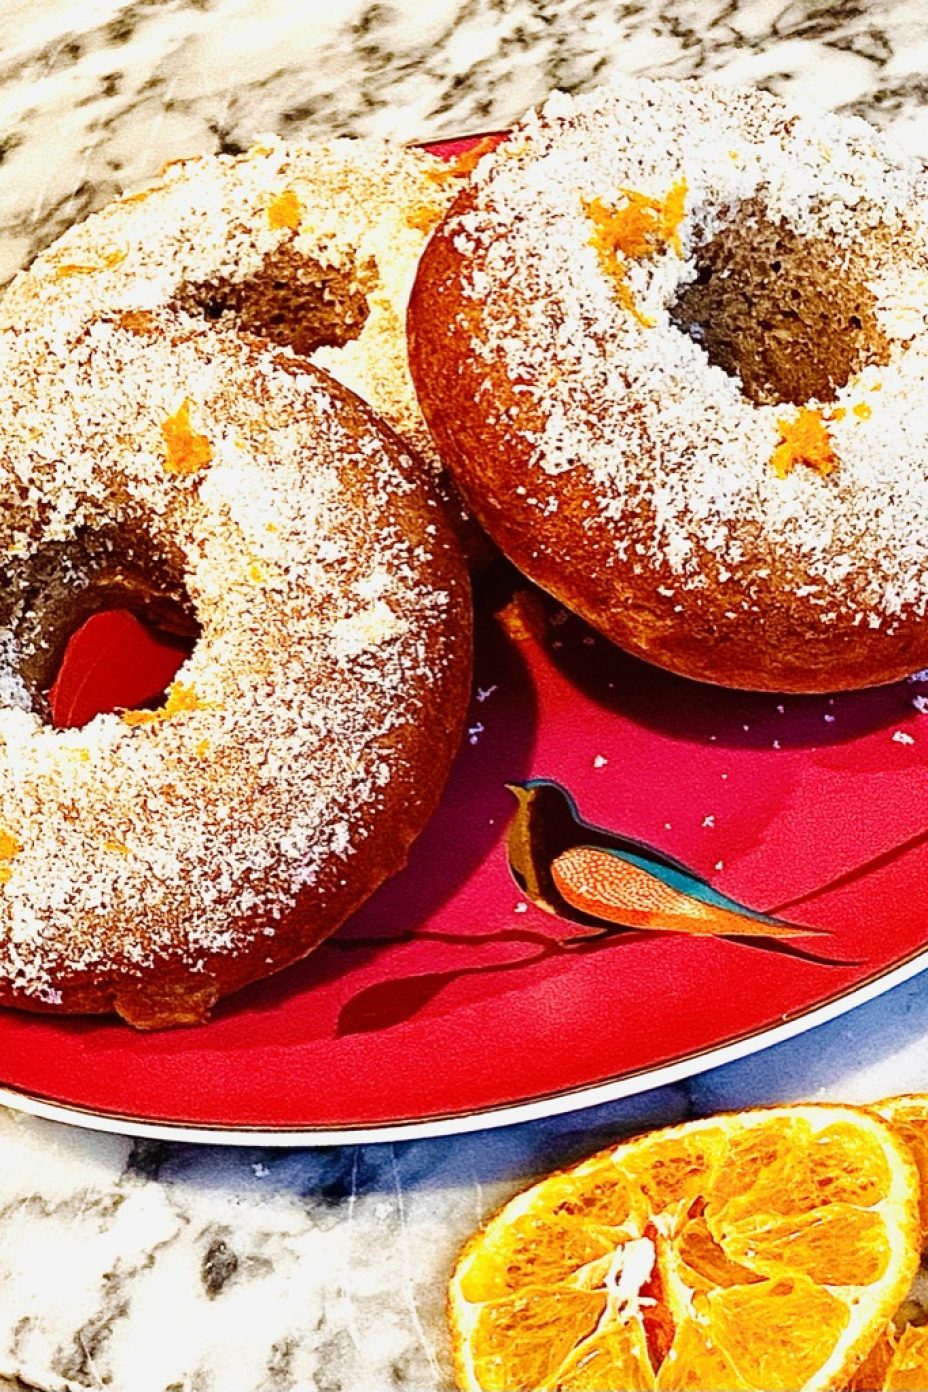 Baked banana and cinnamon breakfast doughnuts with orange sugar. Displayed on a plate with orange slices below for decoration.